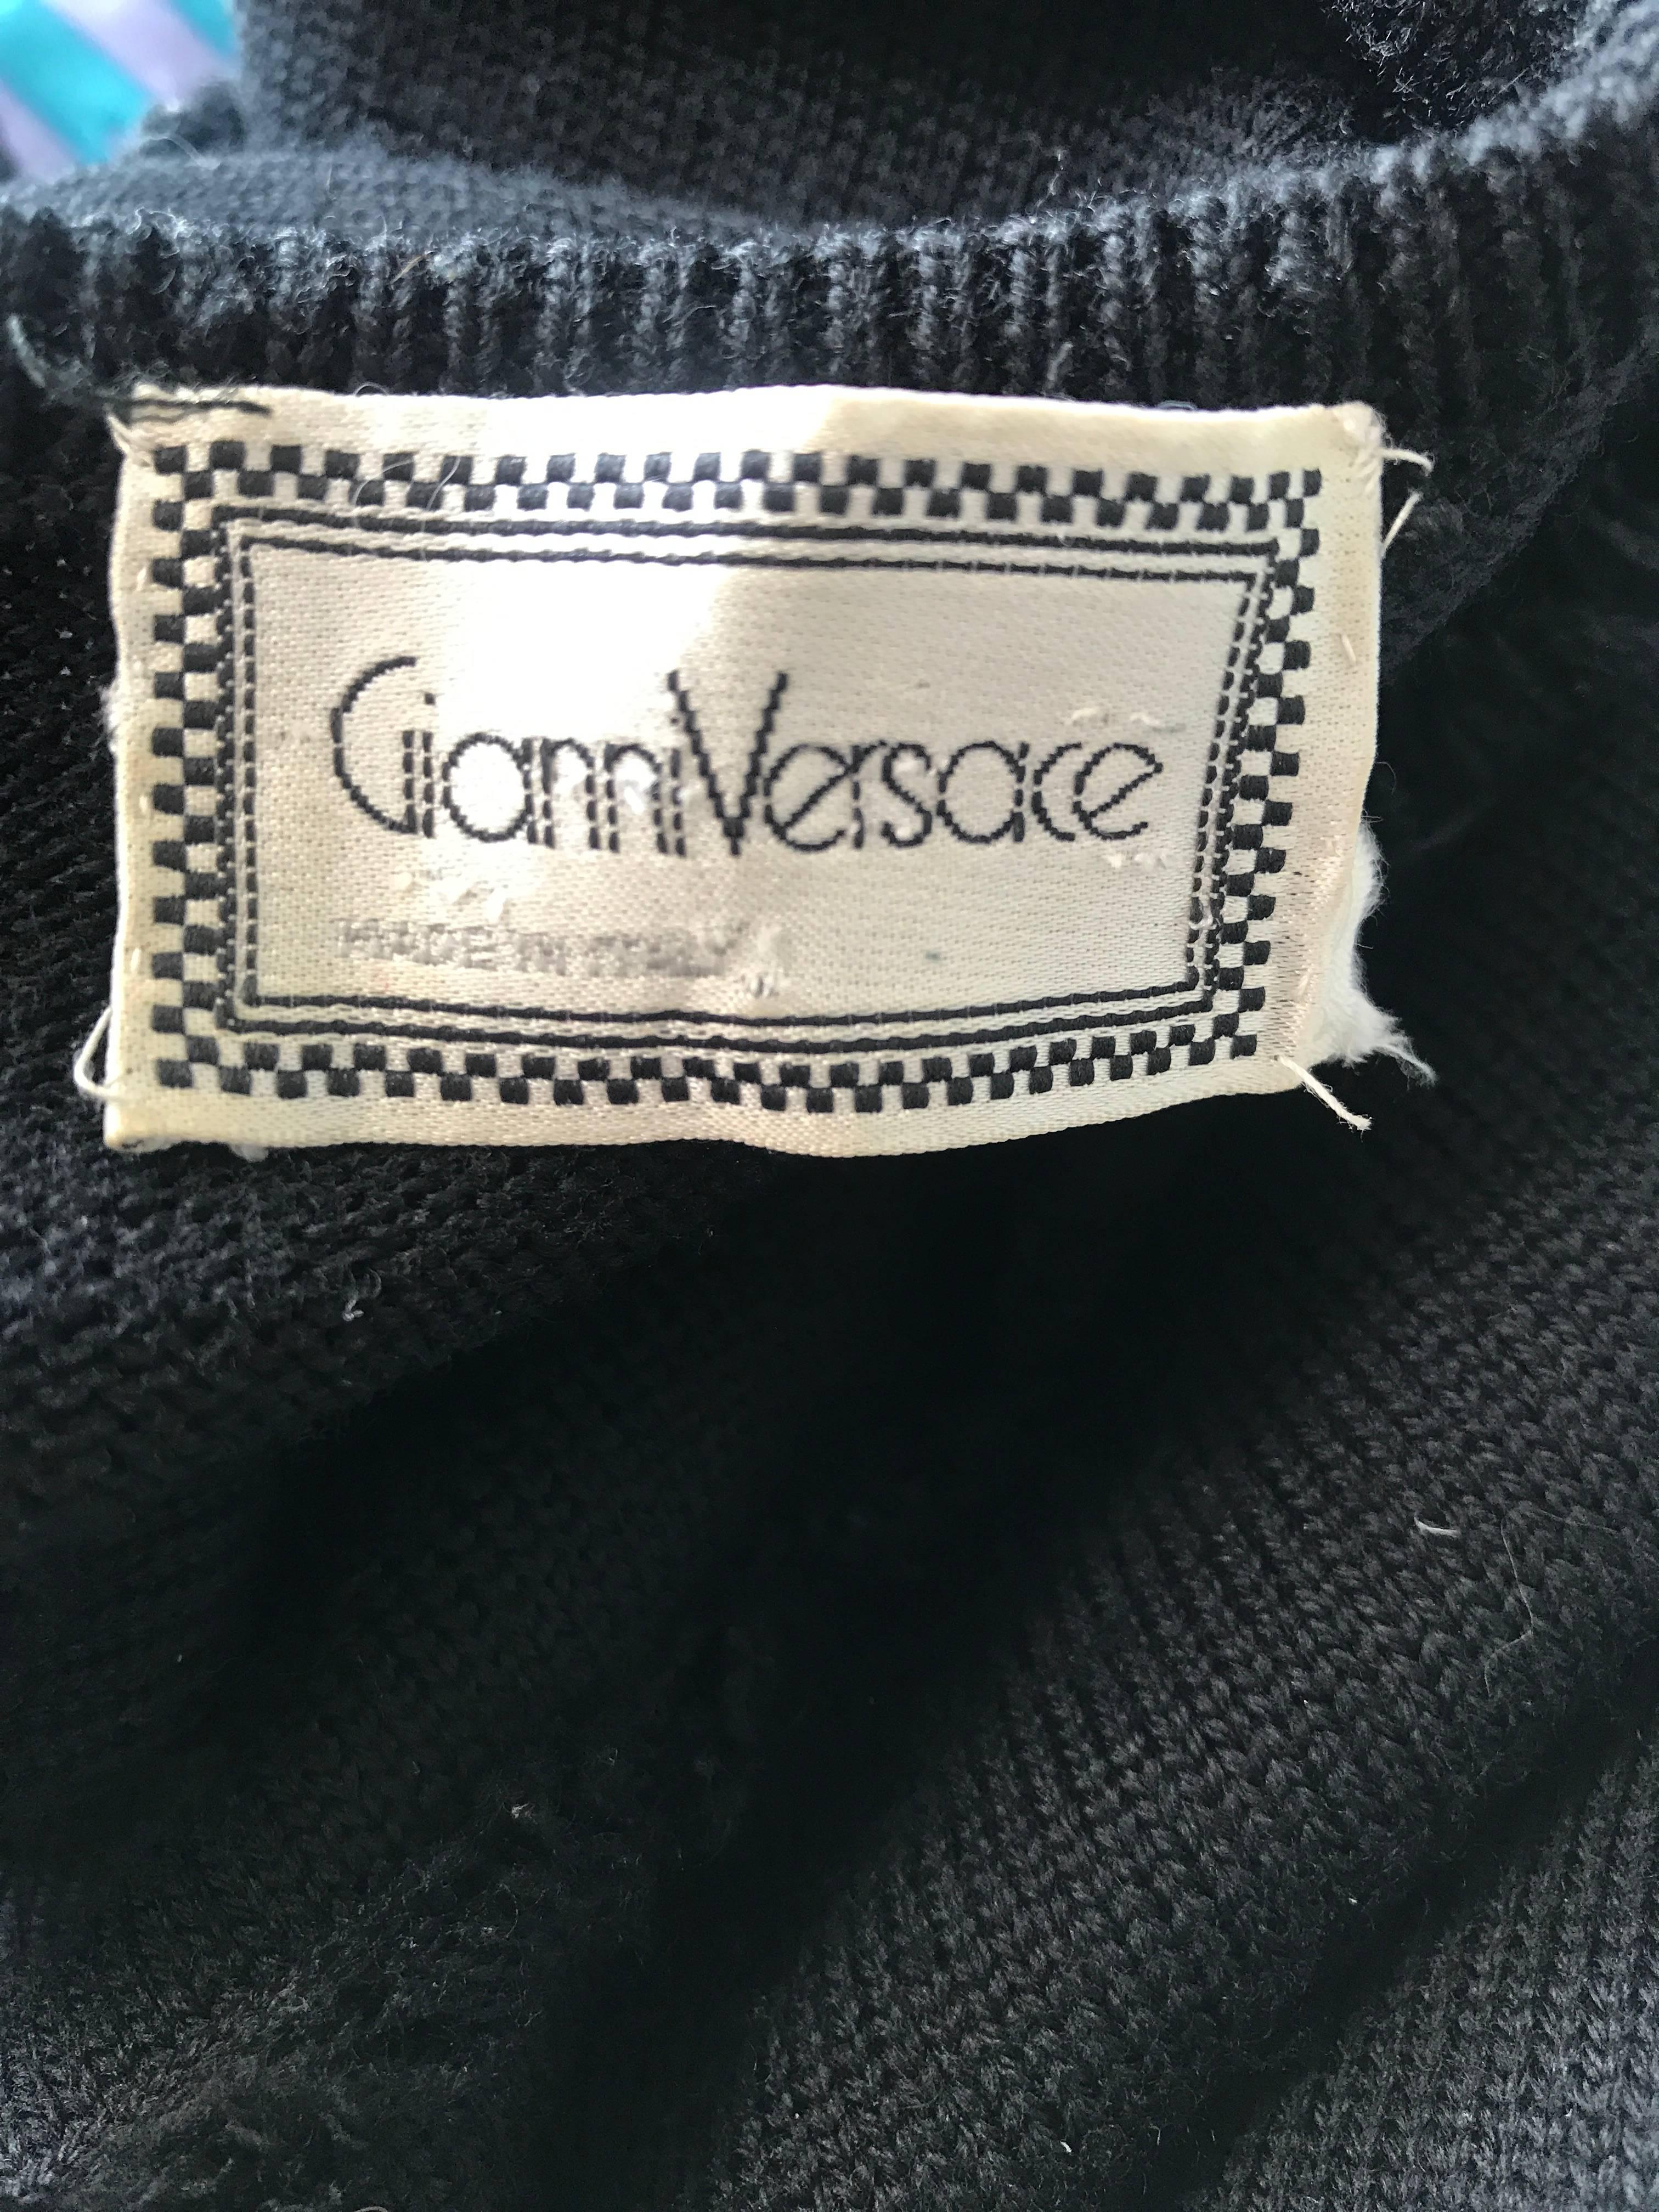 Early Gianni Versace 1980s Sexy Black Fringe 80s Vintage Cotton Sweater Crop Top For Sale 3